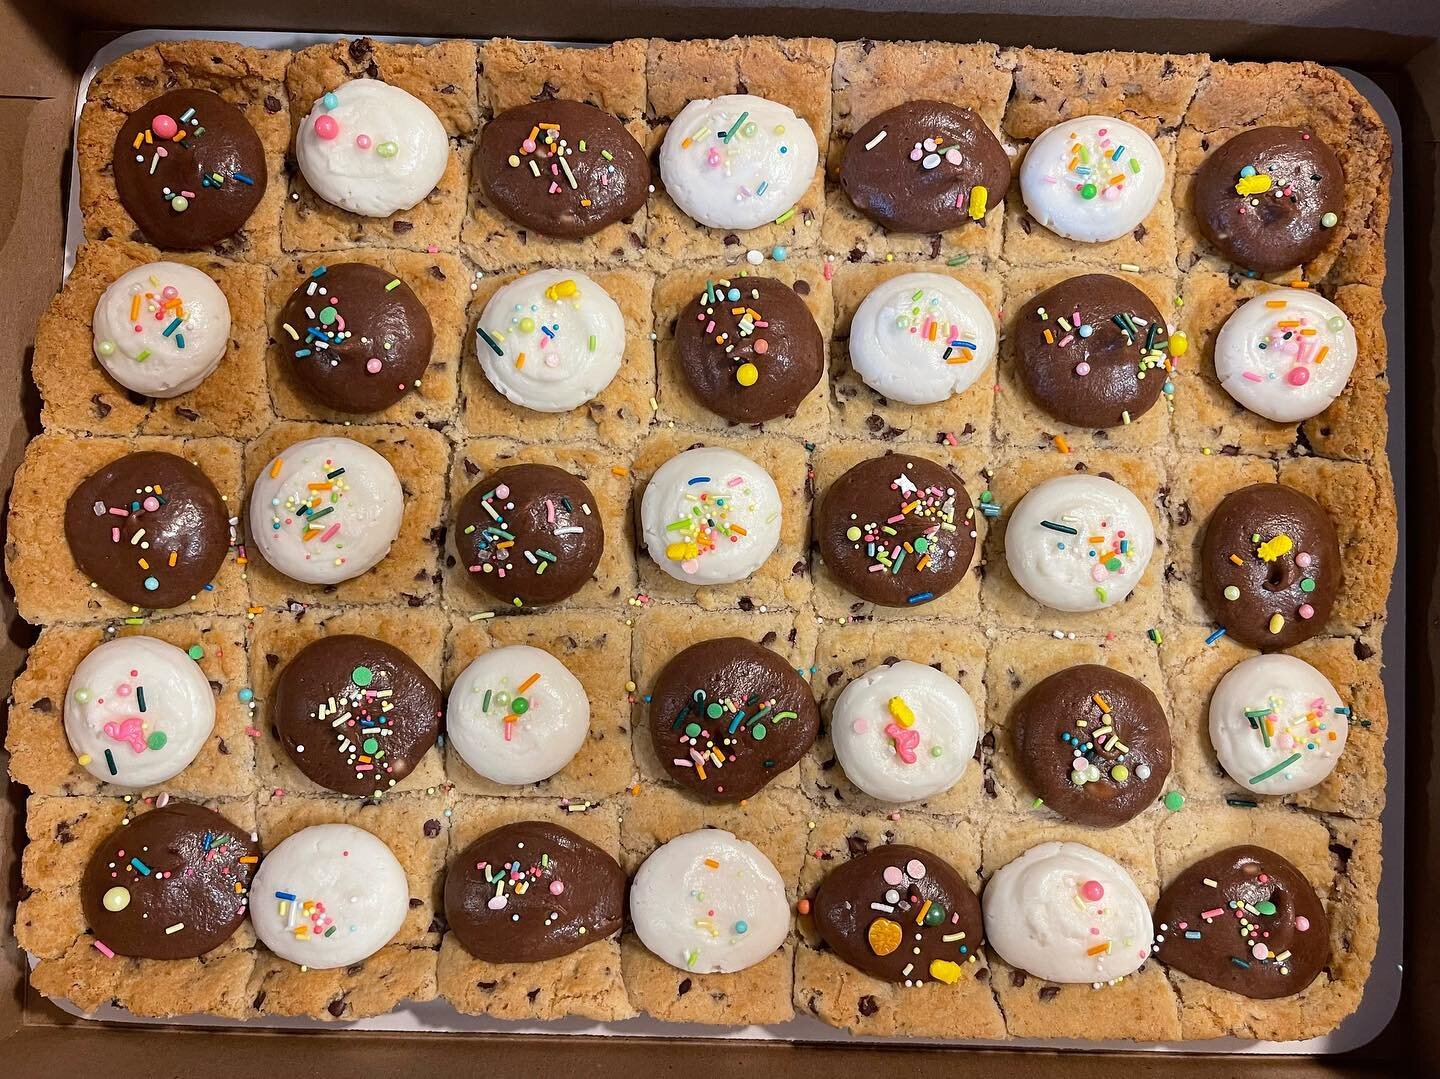 Today&rsquo;s deliveries included 1) 1/3 sheet Summer Vacation Cookie Cake for tomorrow&rsquo;s @st.catherineofsienaschool Kindergarten graduation (made with a Flaxseed Egg substitute for a Kiddo with an egg allergy) and some Summer Vacation cupcakes